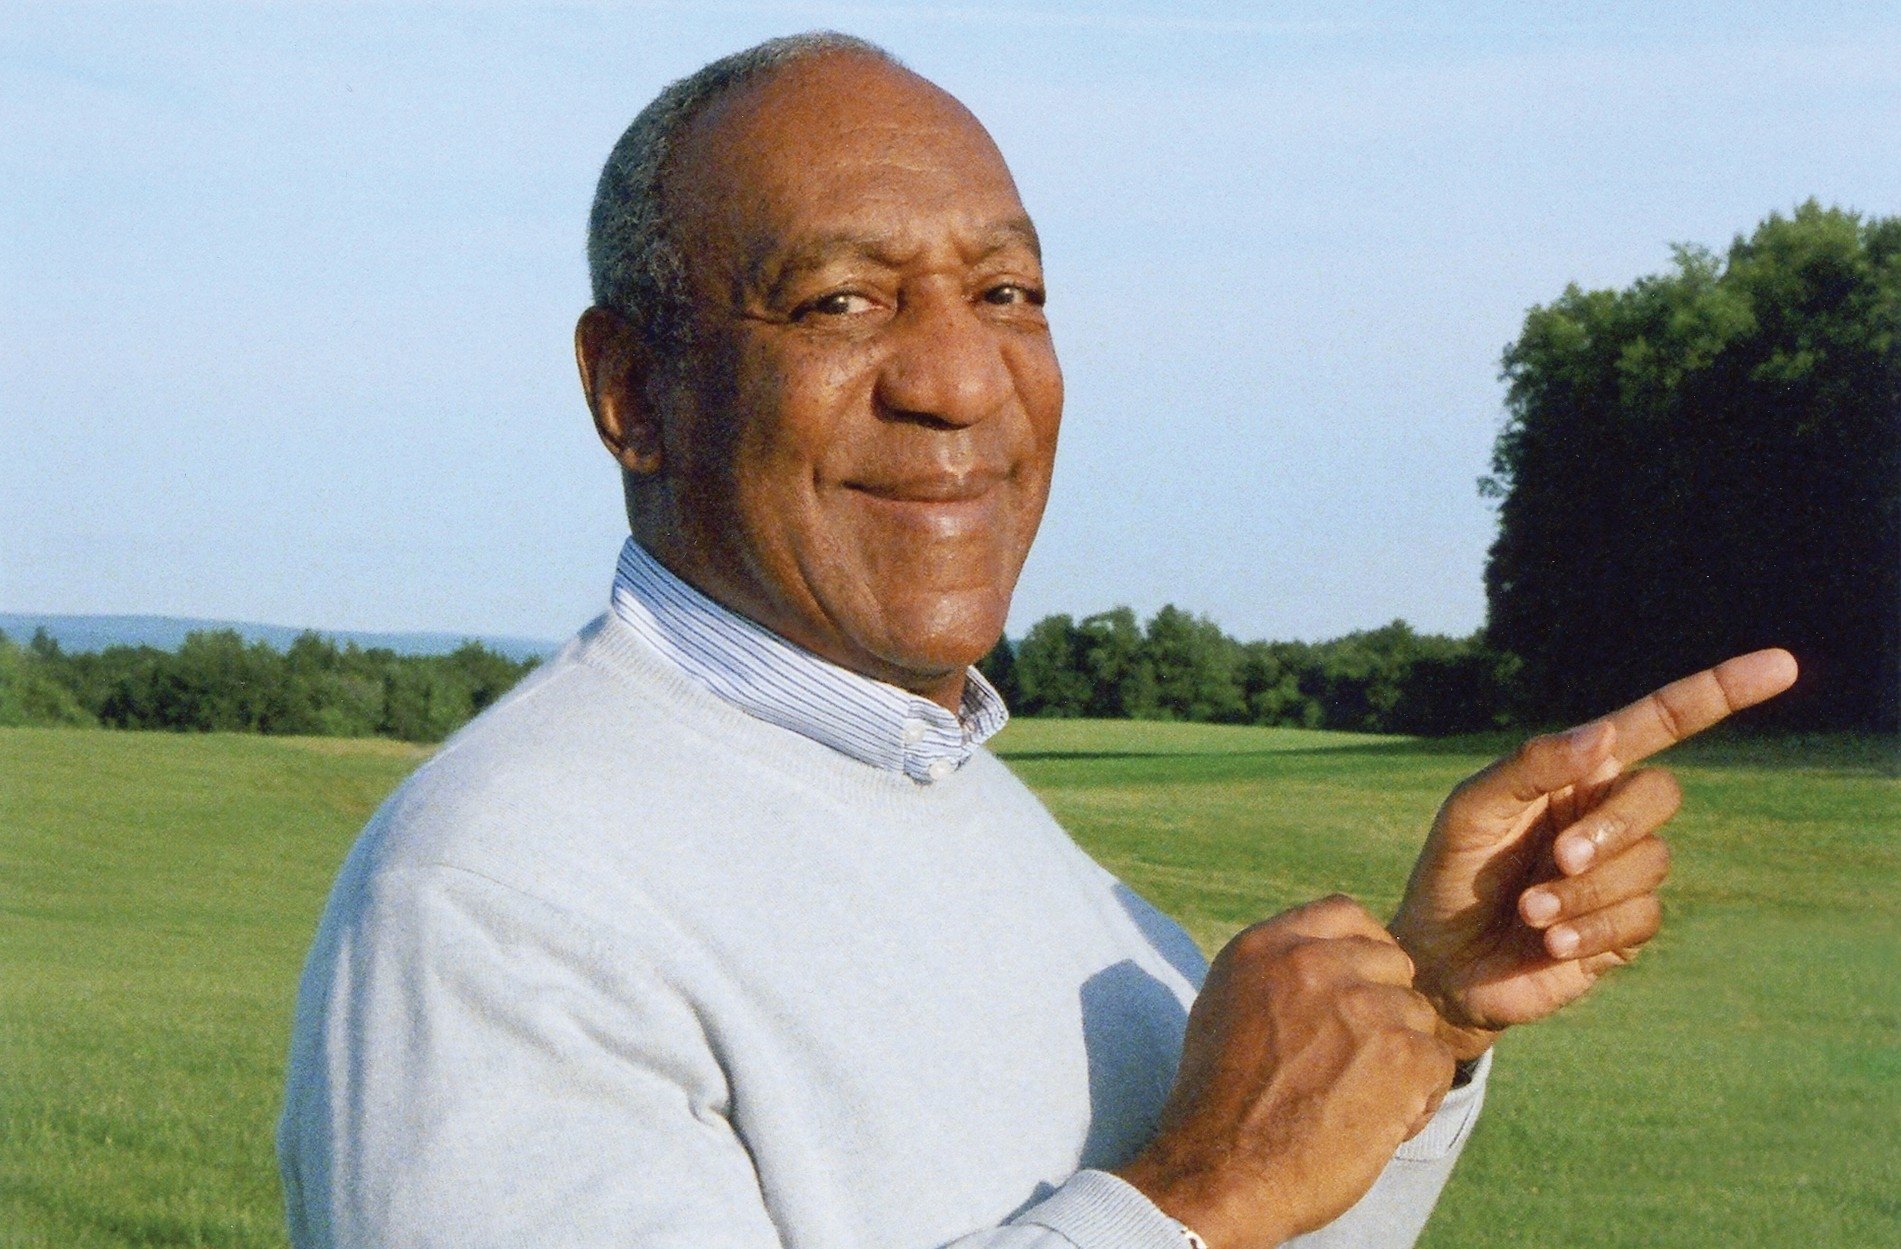 Bill Cosby Wallpapers